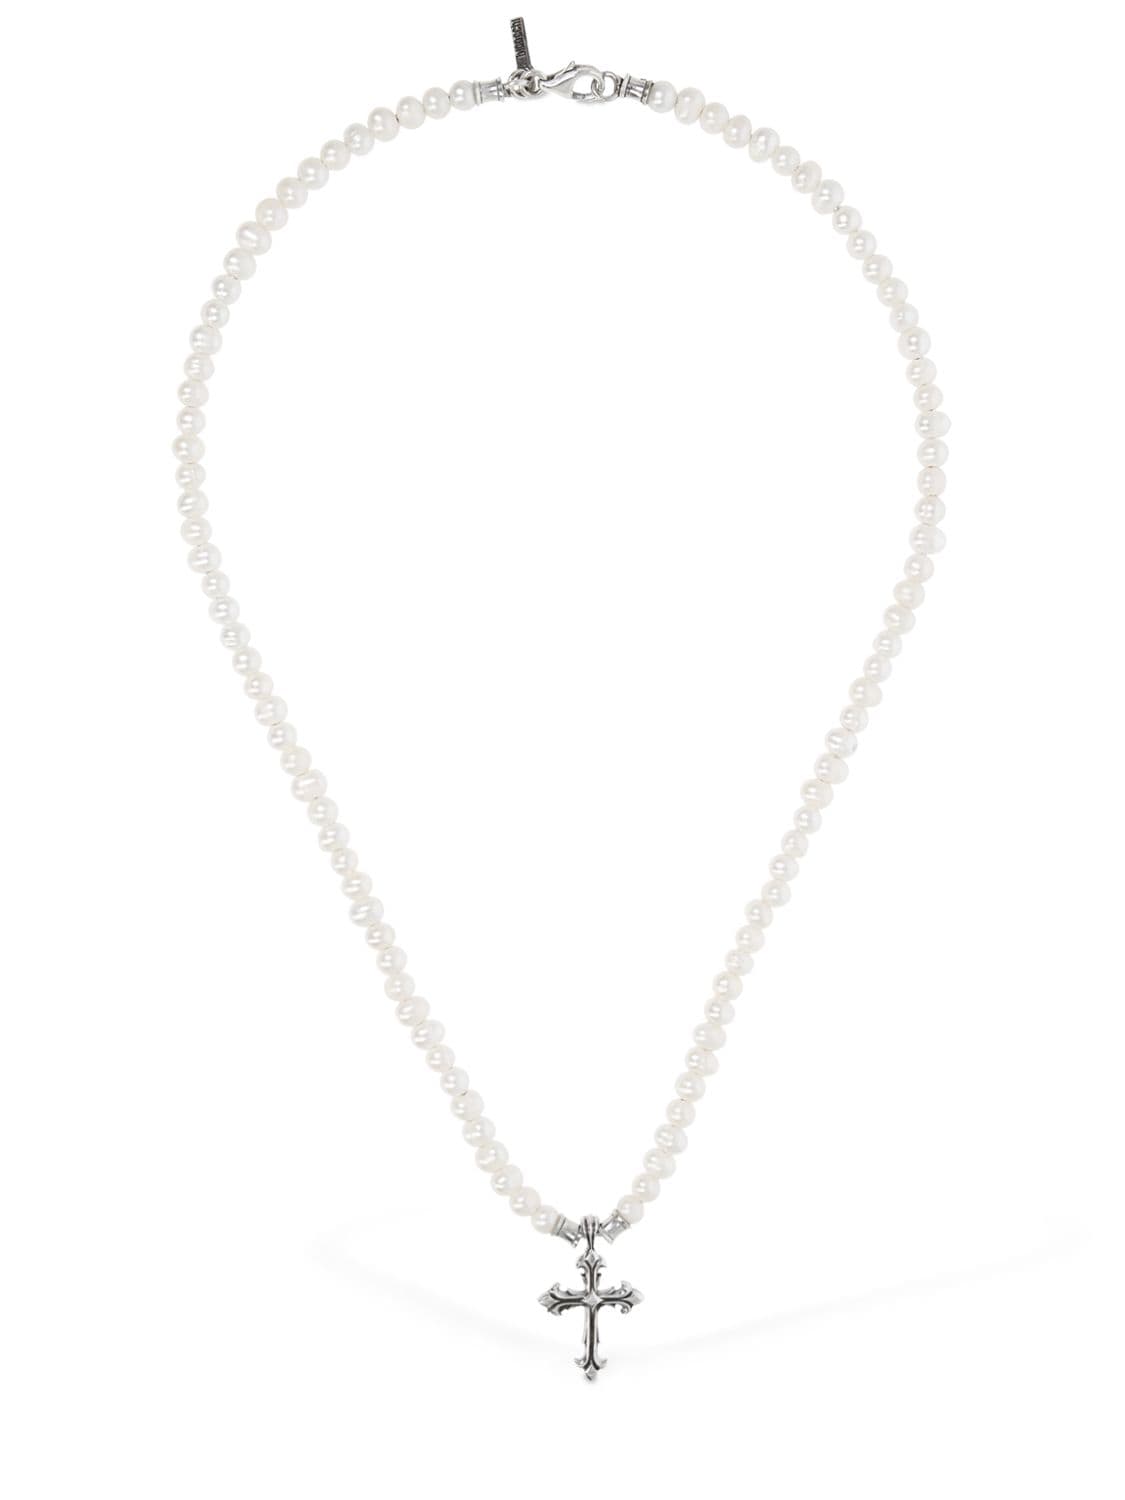 Image of Pearl Chain Necklace W/ Cross